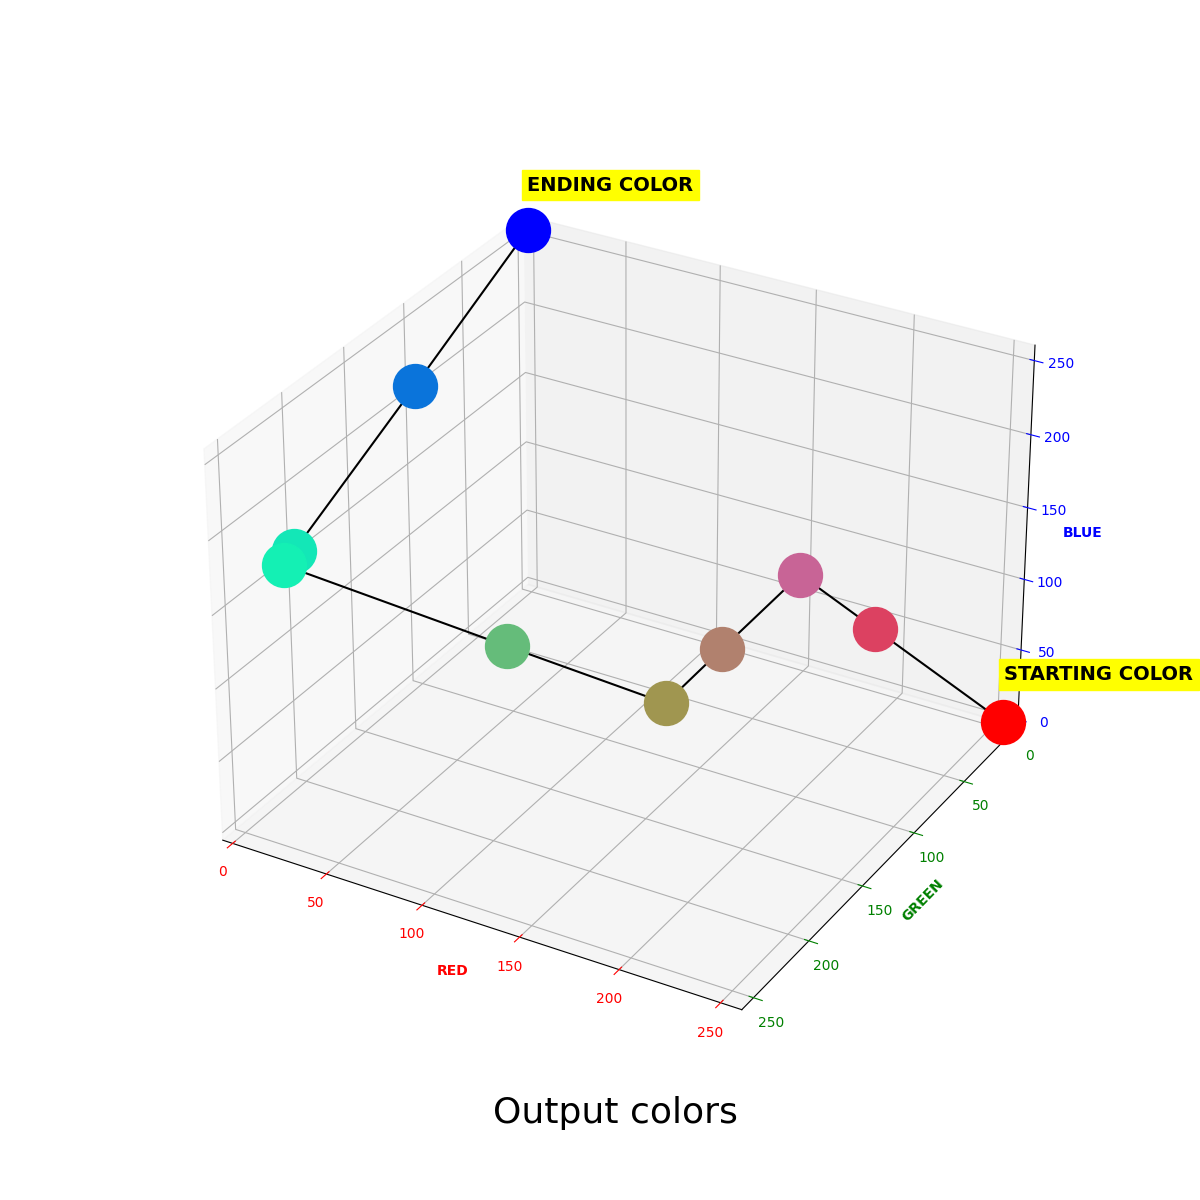 All output colors of the previous example placed as points on a 3D plan